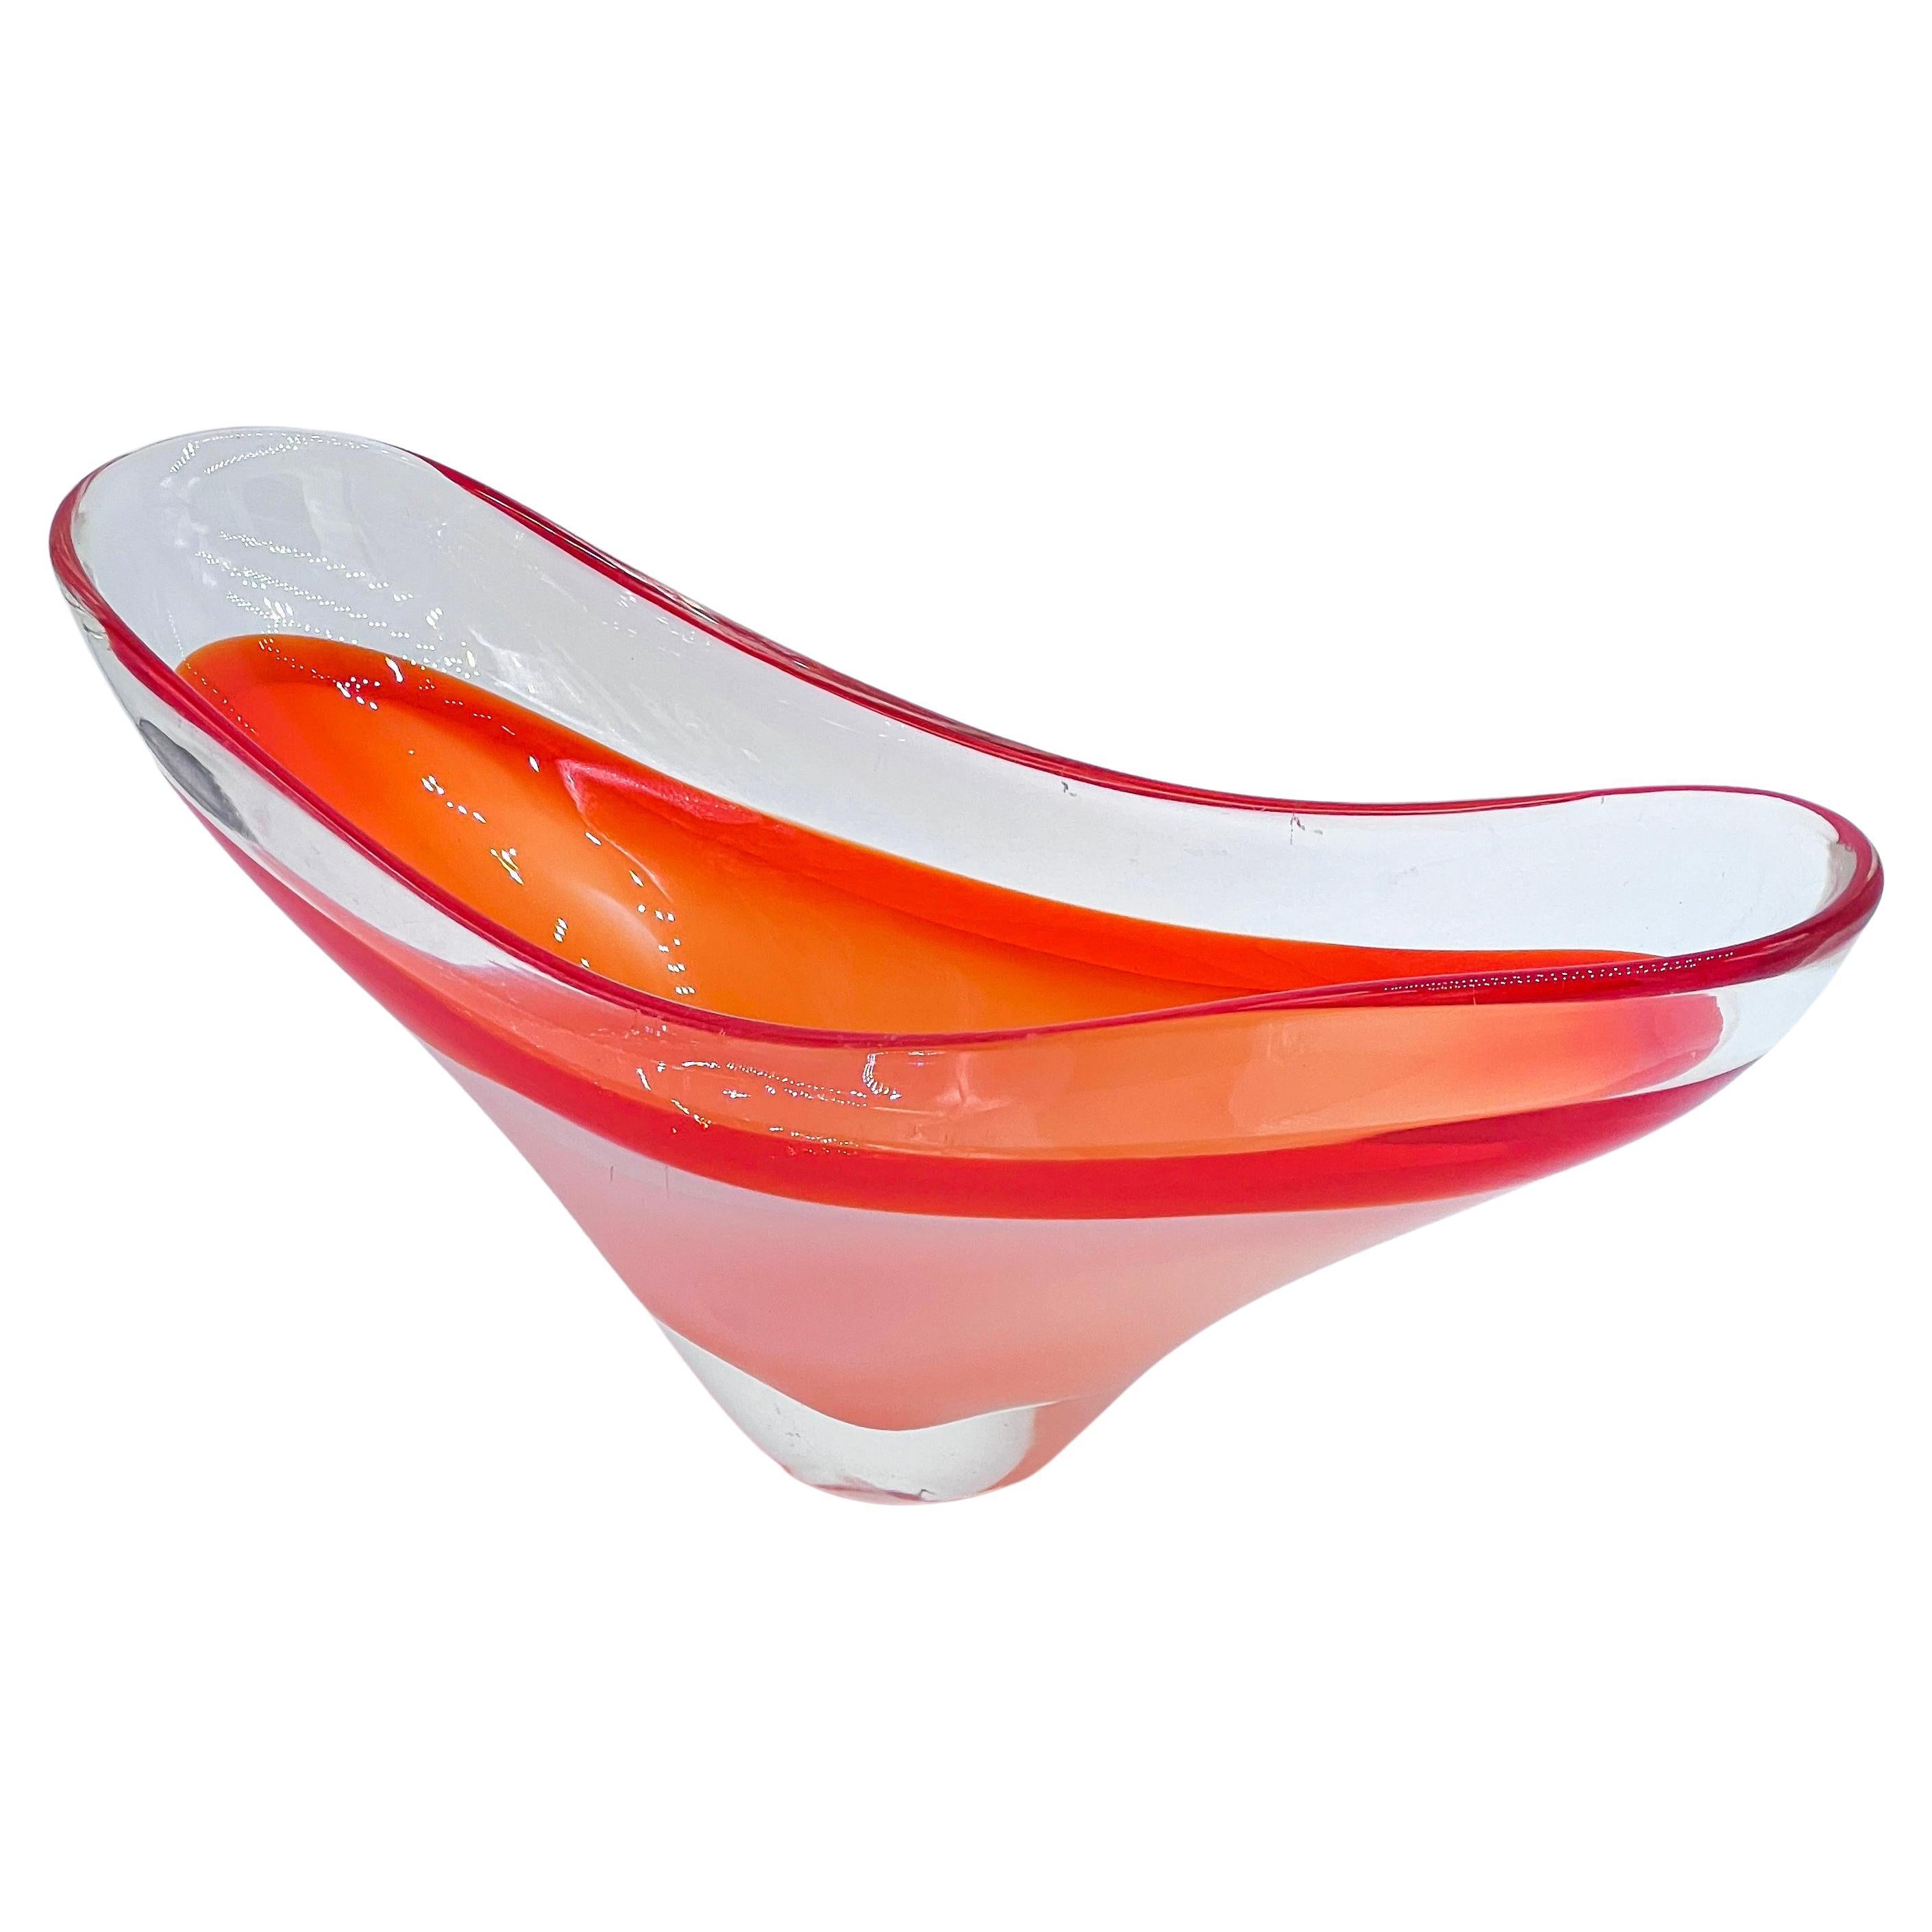 Paul Kedel for Flygsfors Big Coquille Bowl in Orange, White and Clear Glass